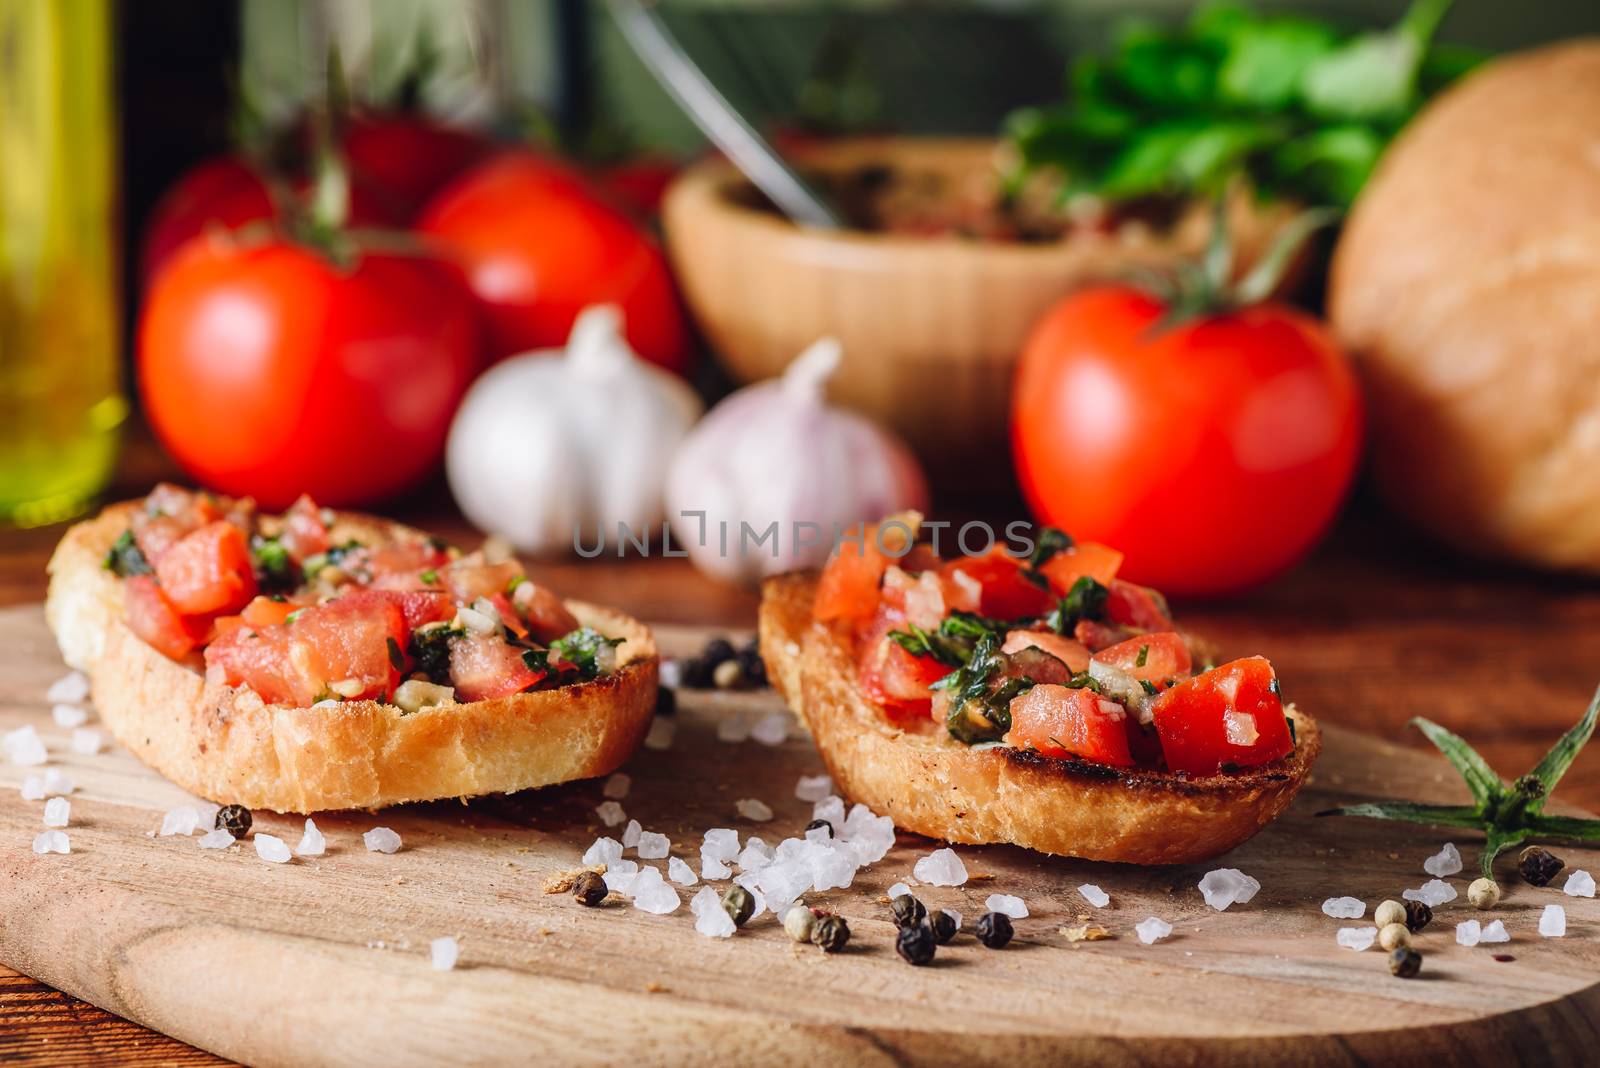 Classic Bruschettas with Tomatoes and Ingredients on background